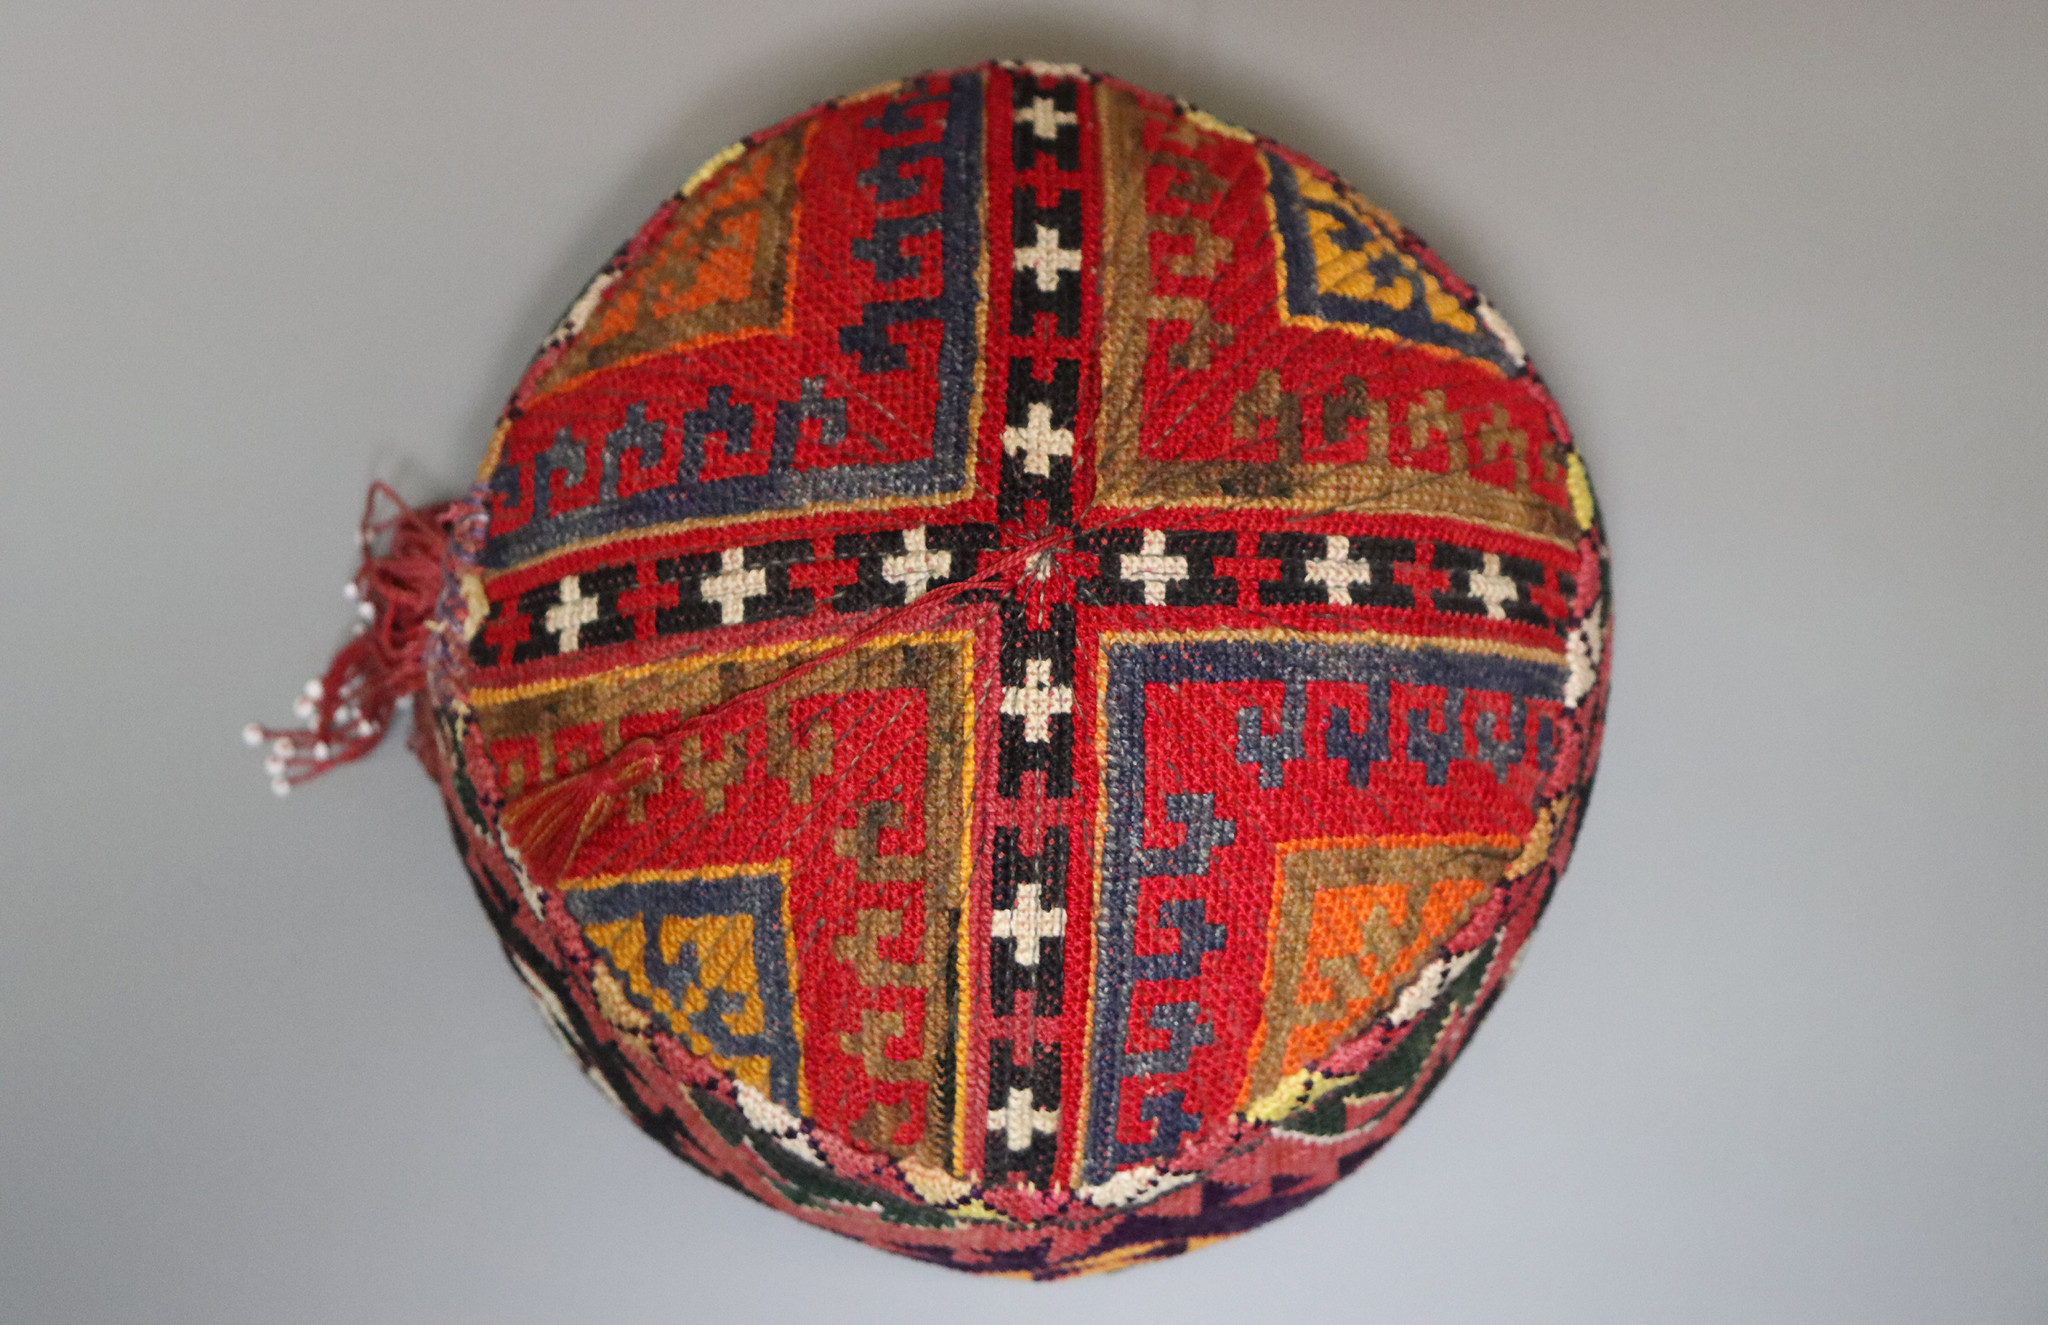 Antique hand embroidered  cap hat  from Afghanistn and Uzbekistan No:22/8